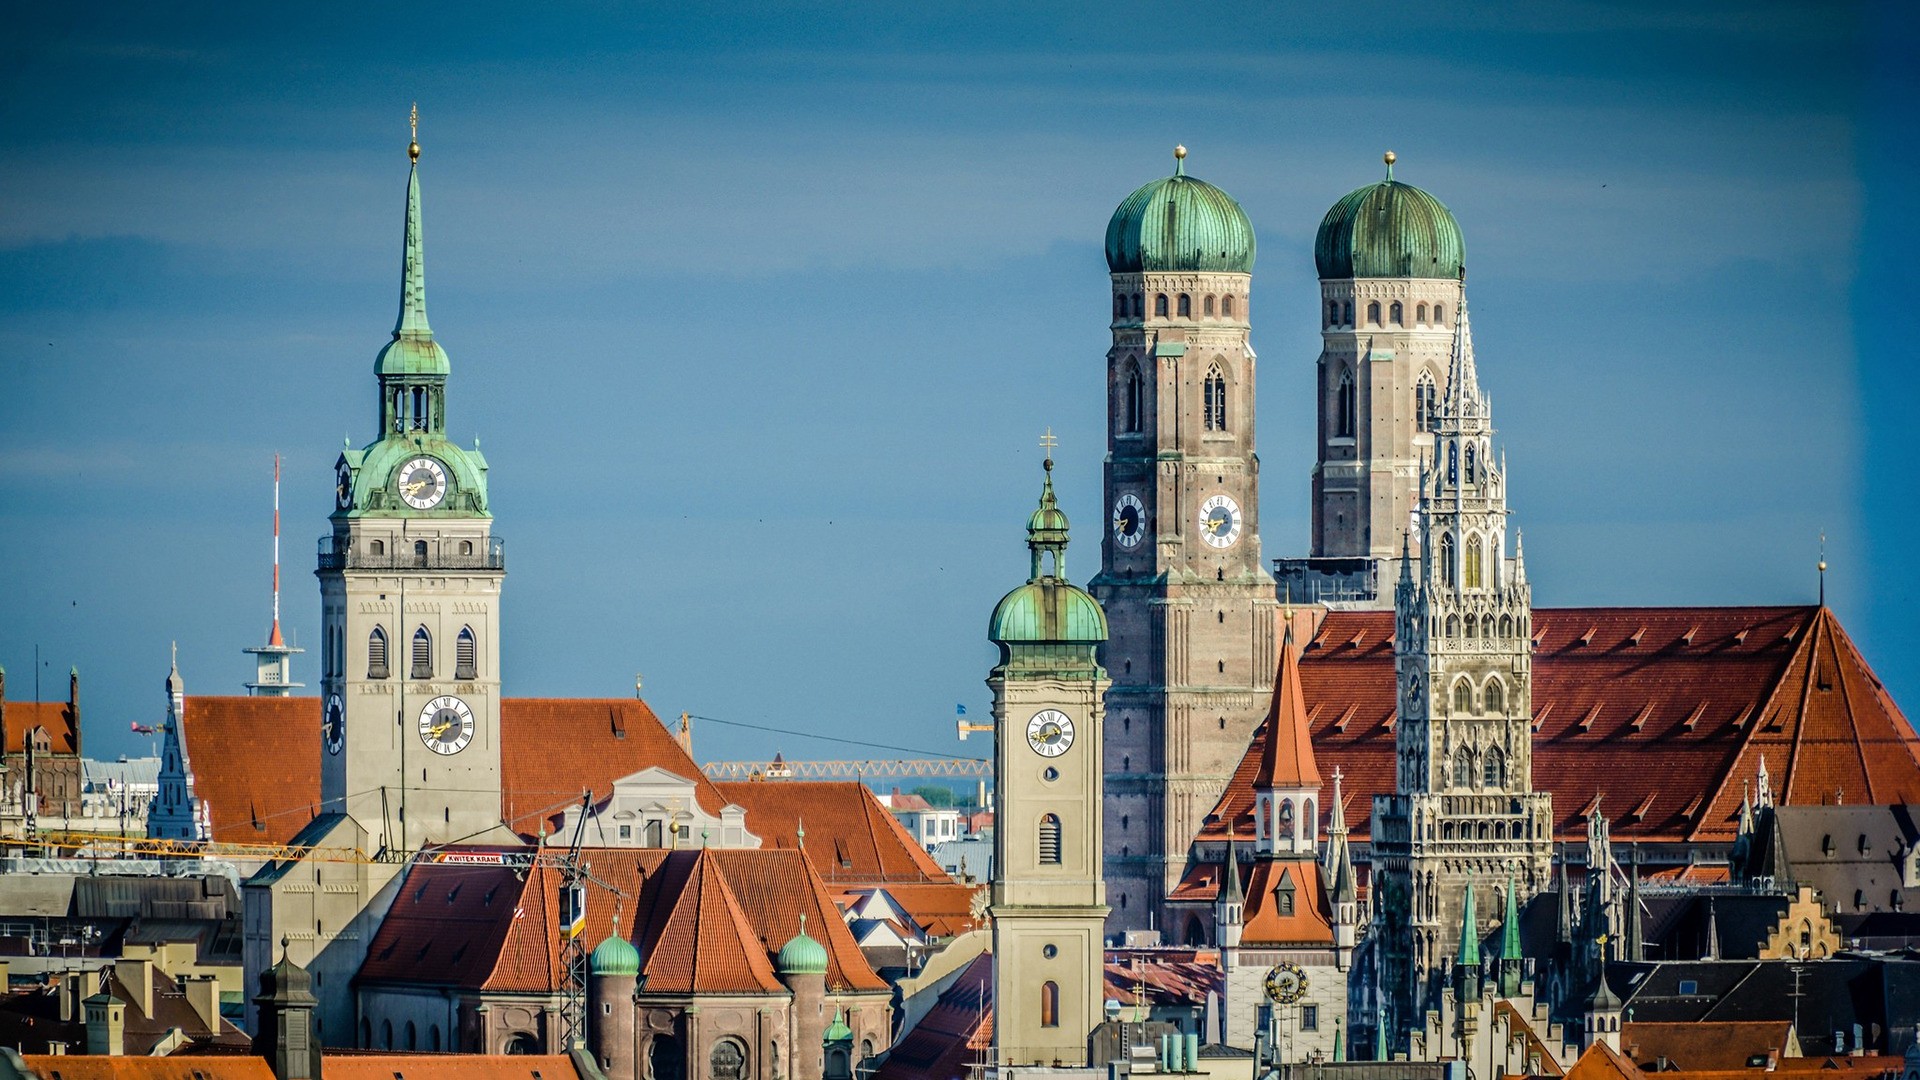 Cityscape Architecture Tower Old Building Old Building Germany Munich Church Rooftops Clock Tower Cl 1920x1080